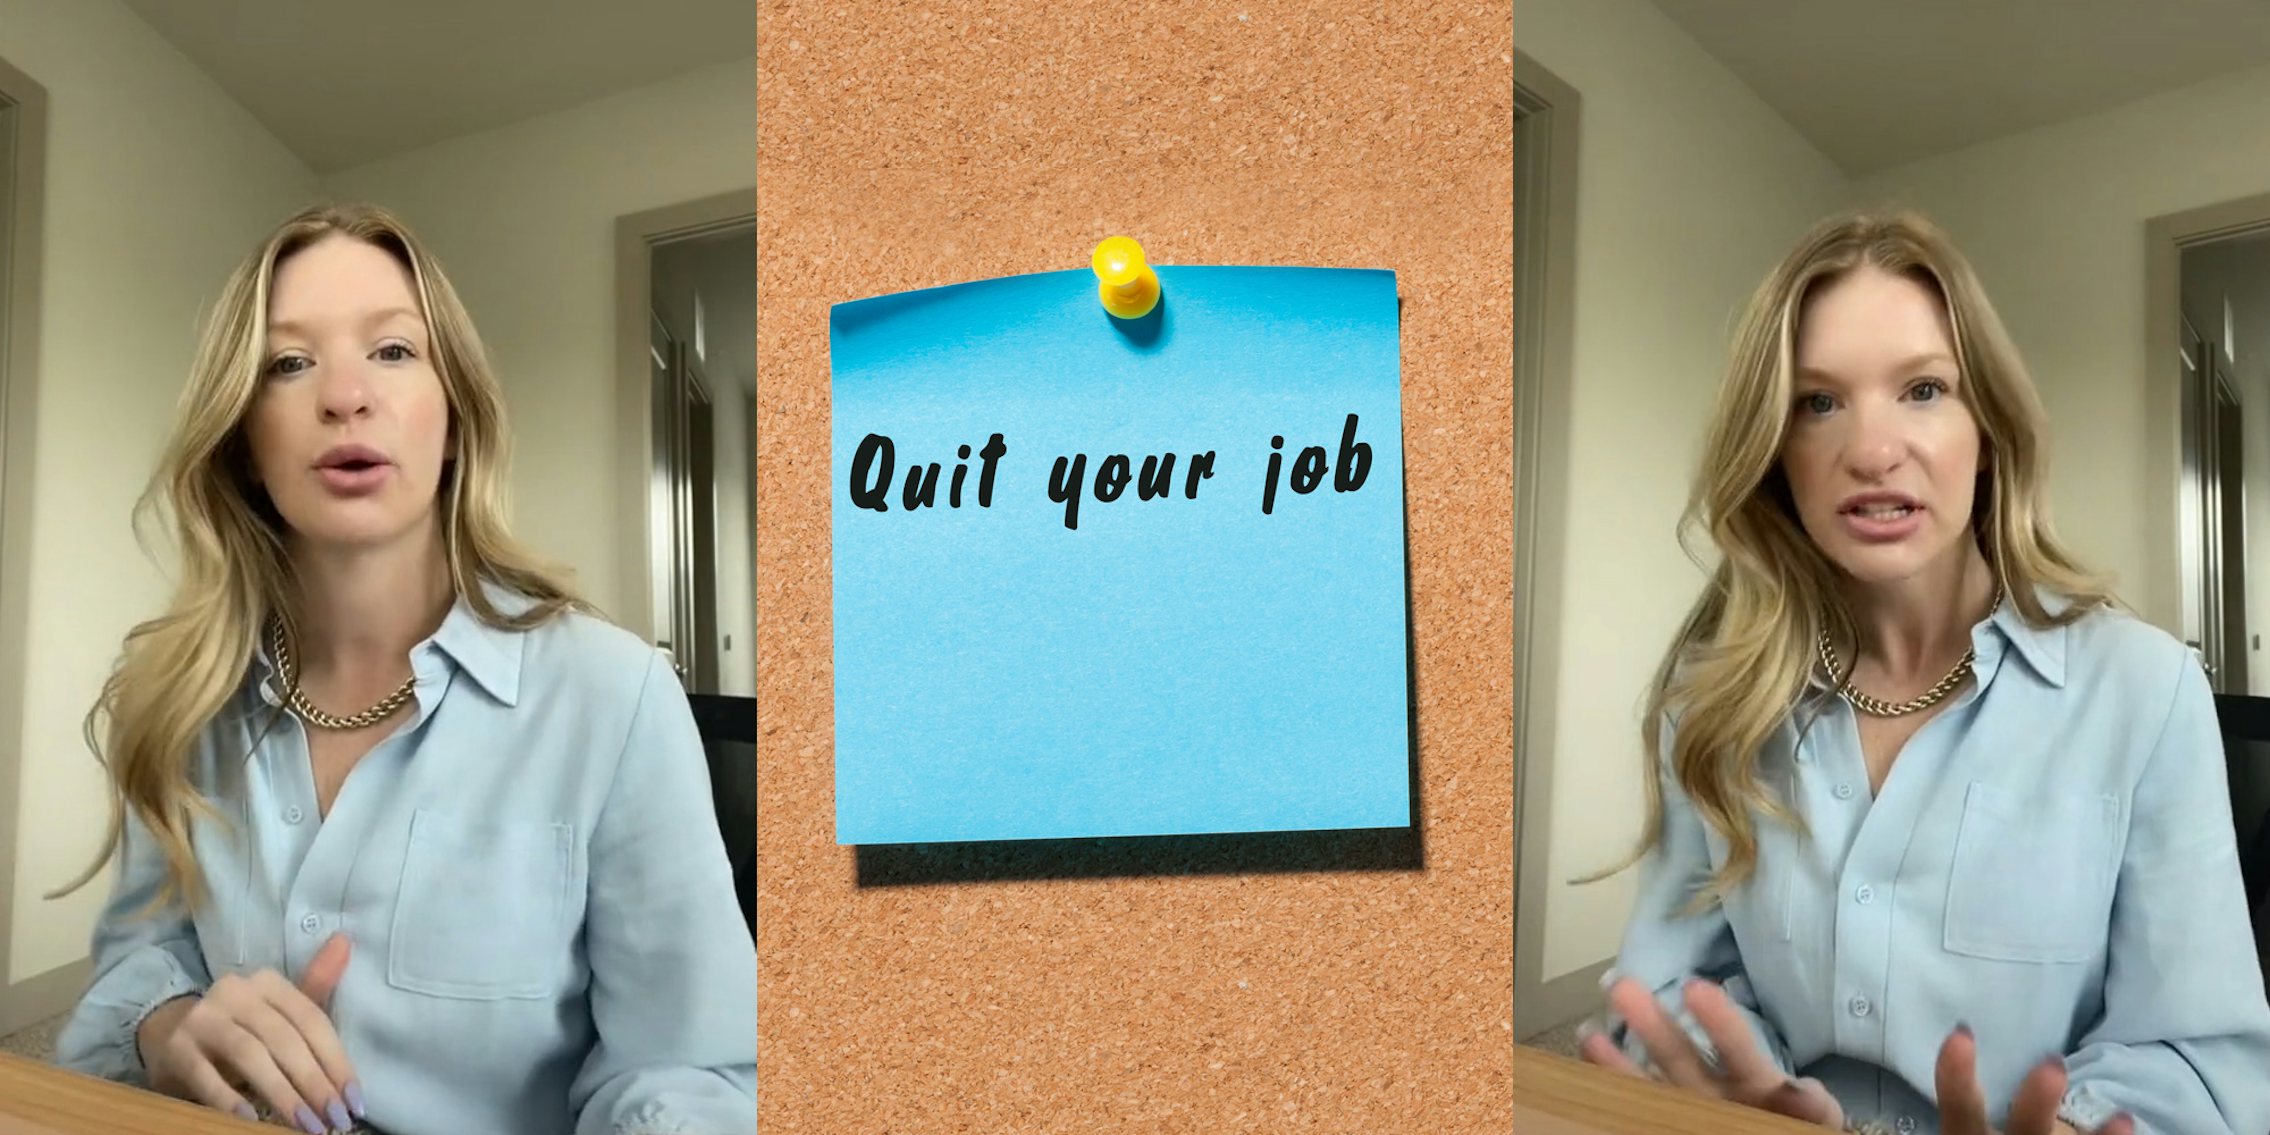 woman speaking in computer chair (l) 'Quit your job' sticky note on cork board (c) woman speaking in computer chair (r)